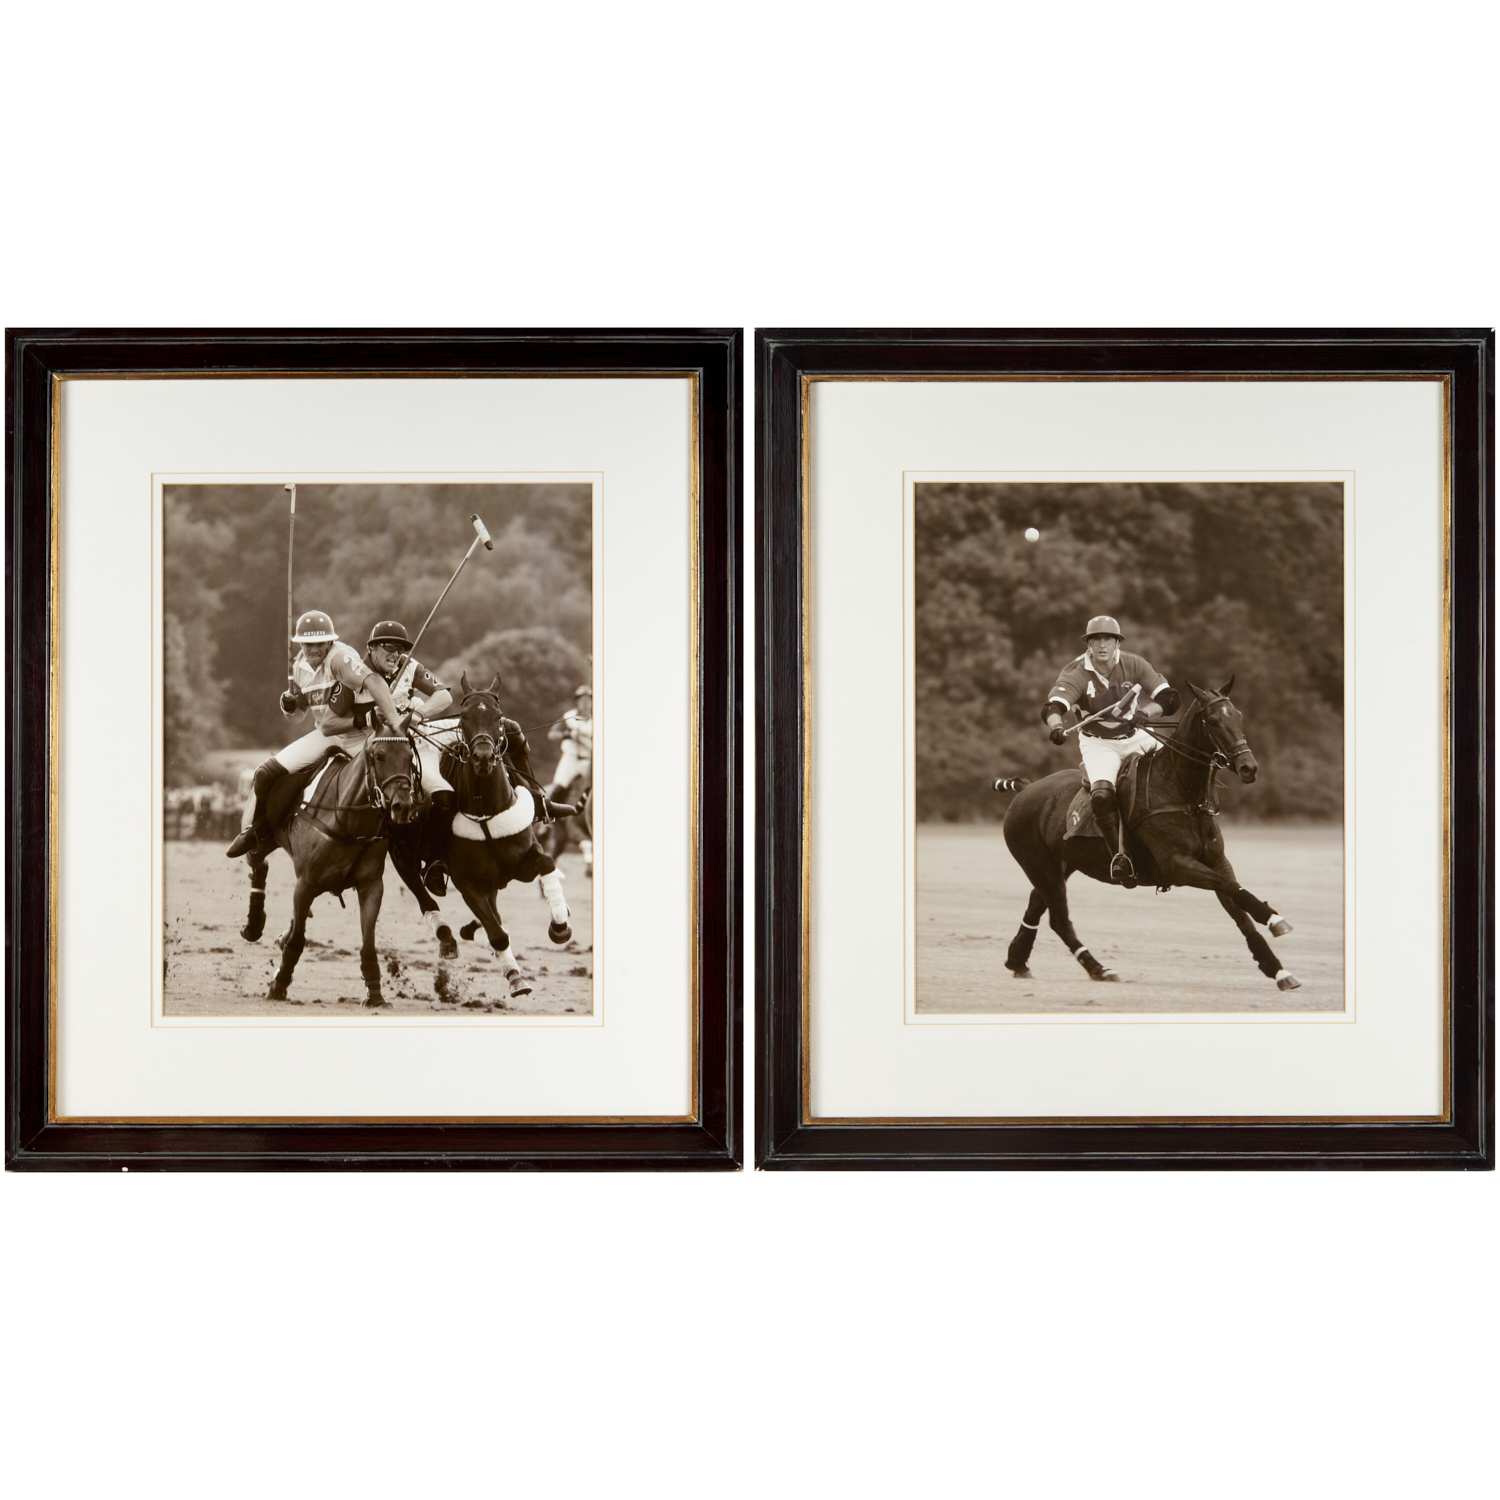 WORLD POLO LEAGUE, PAIR LARGE FORMAT